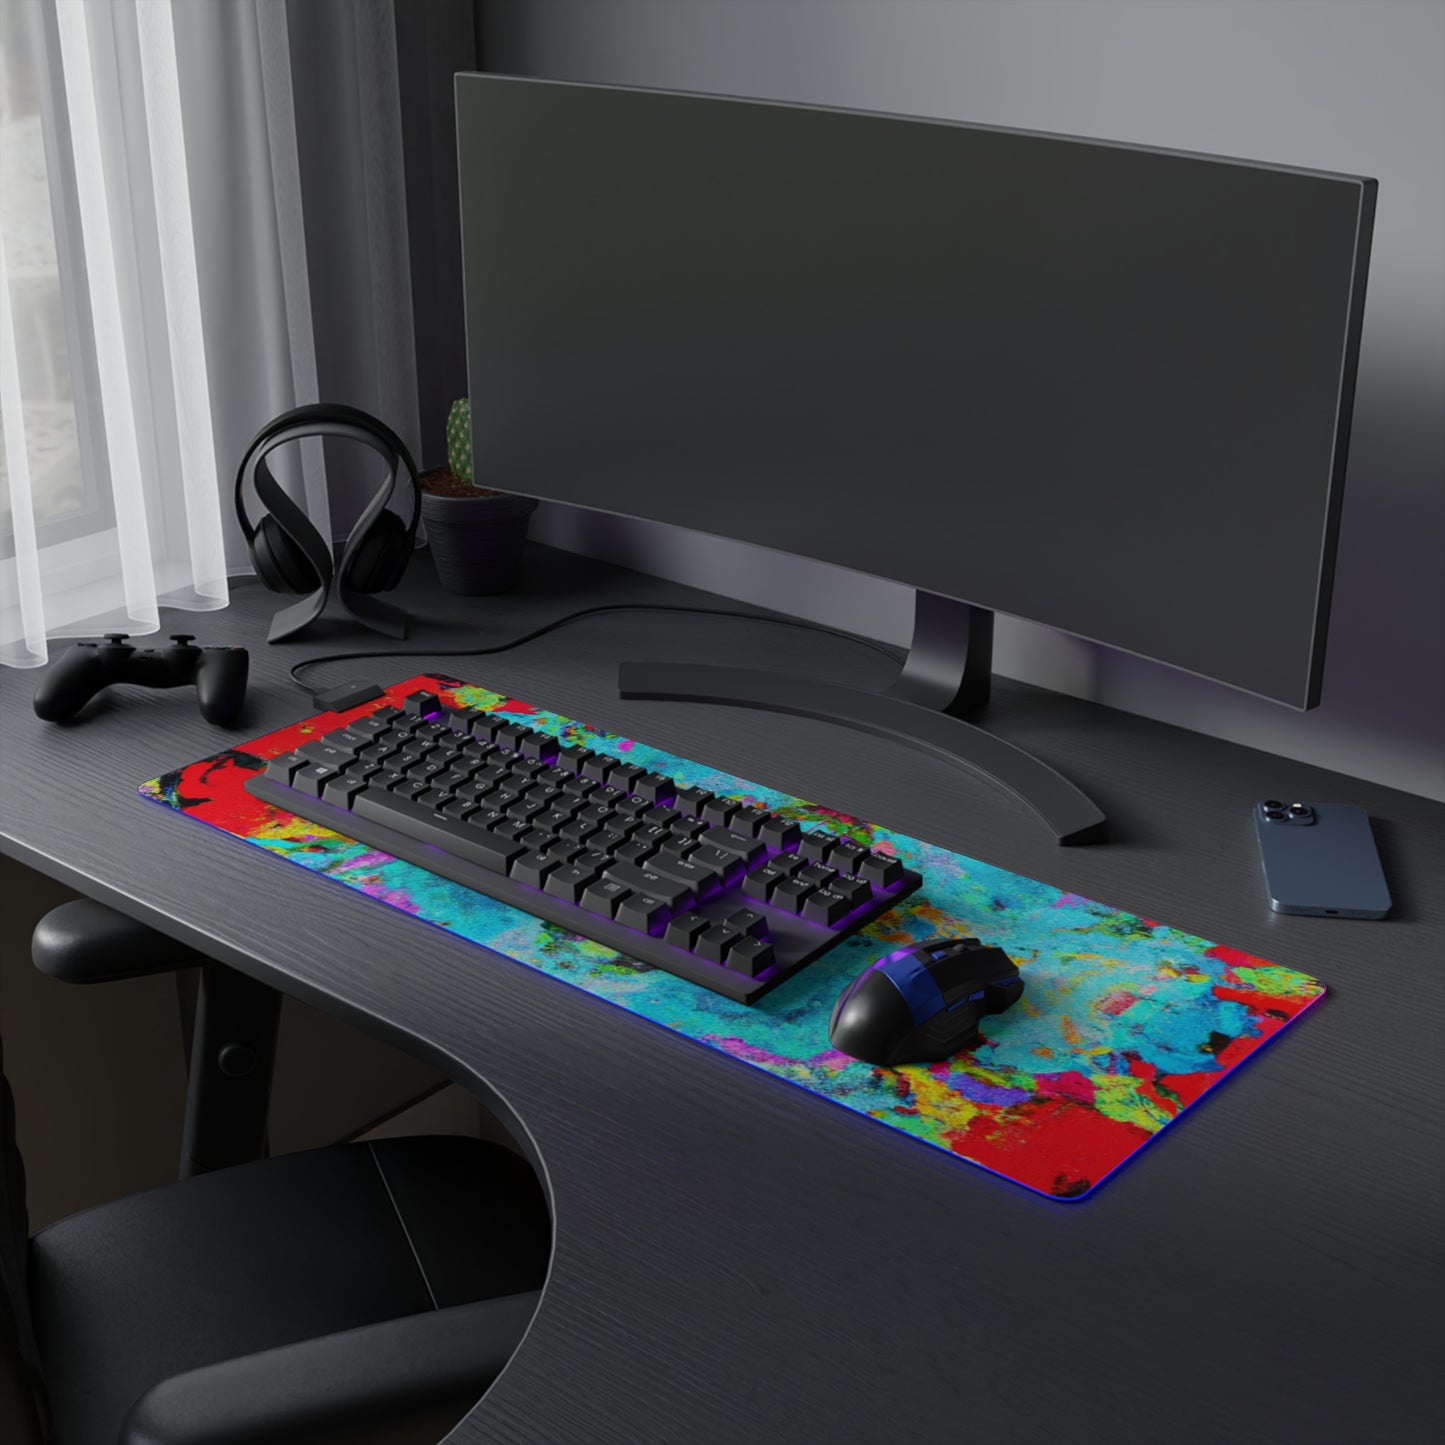 Hank Hotrod - Psychedelic Trippy LED Light Up Gaming Mouse Pad